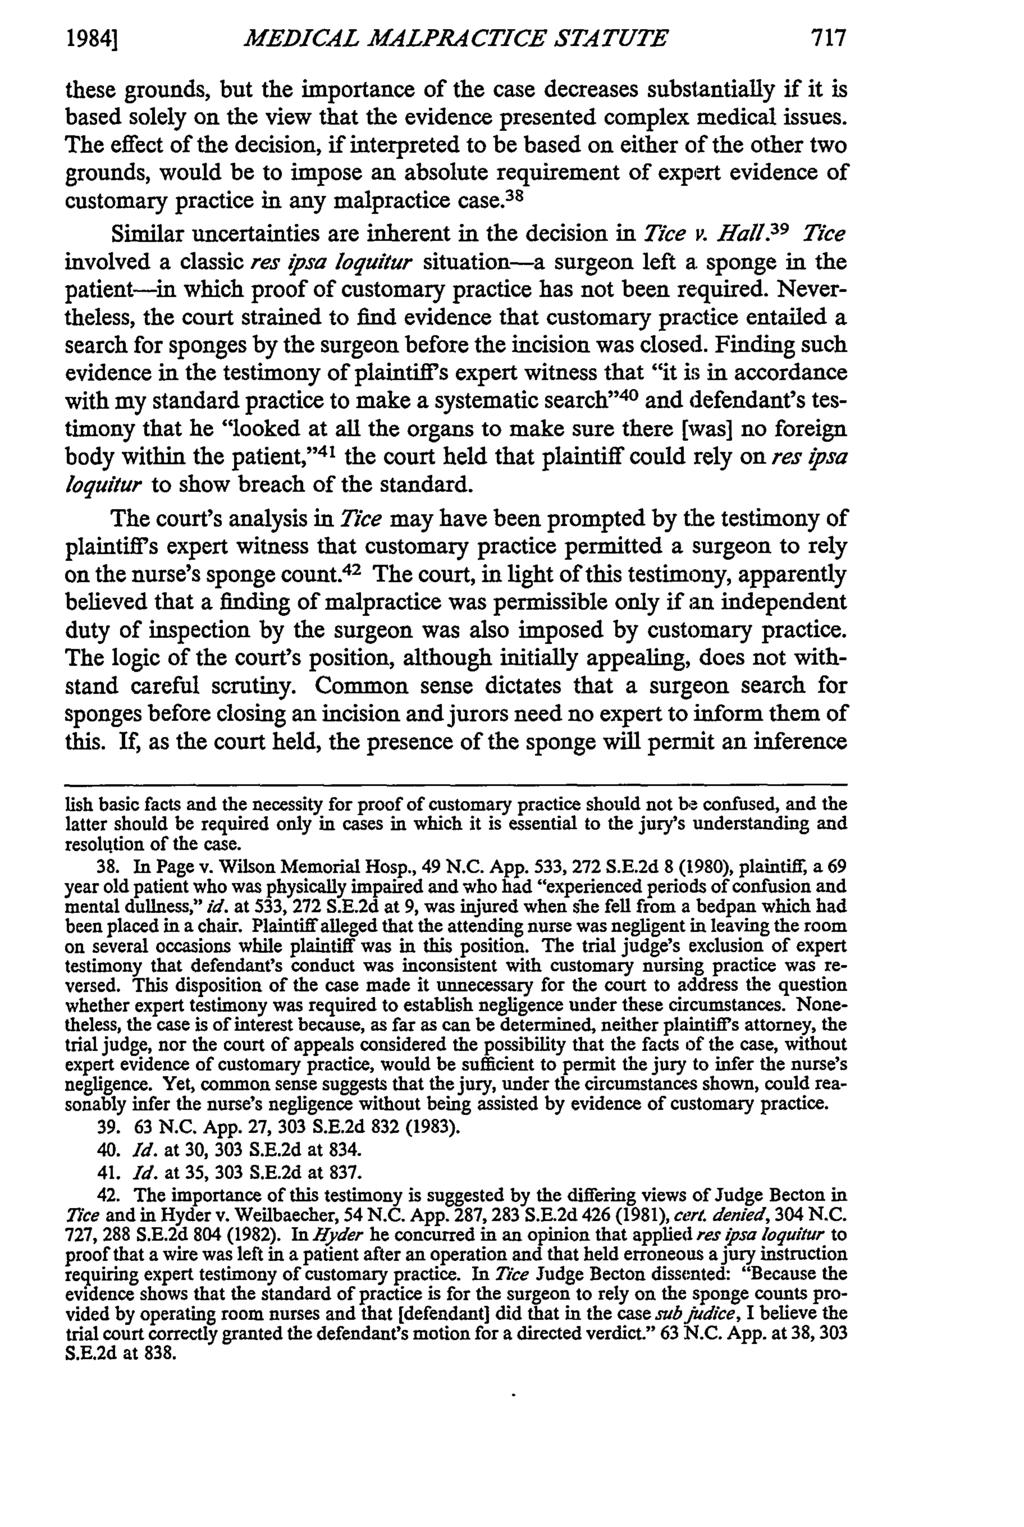 19841 MEDICAL MALPRA CTICE STATUTE these grounds, but the importance of the case decreases substantially if it is based solely on the view that the evidence presented complex medical issues.